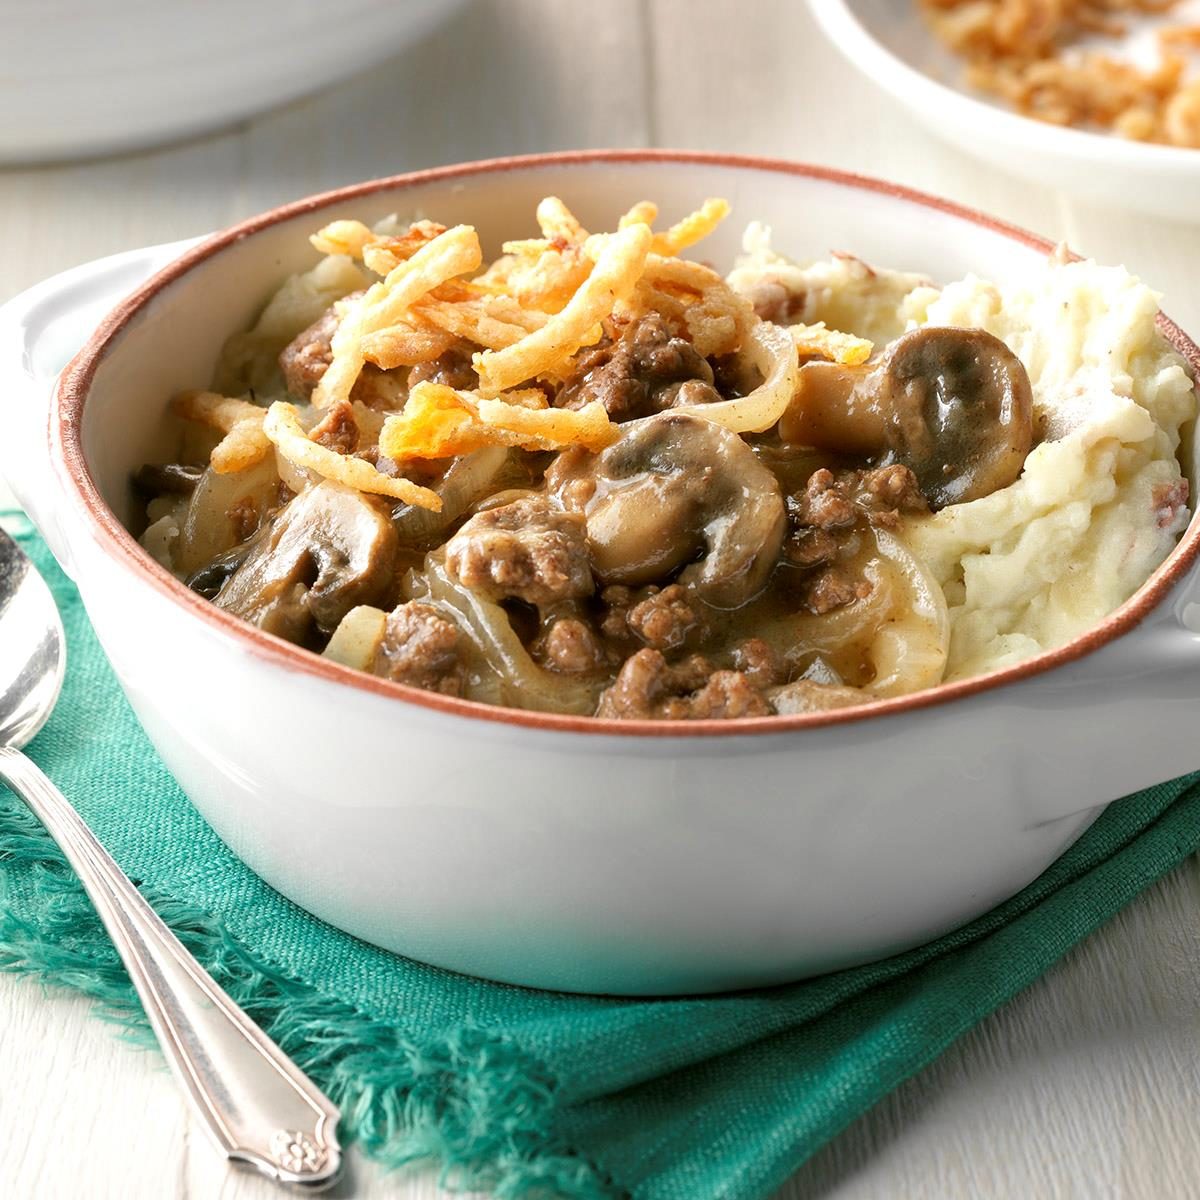 Beef and Mushrooms with Smashed Potatoes